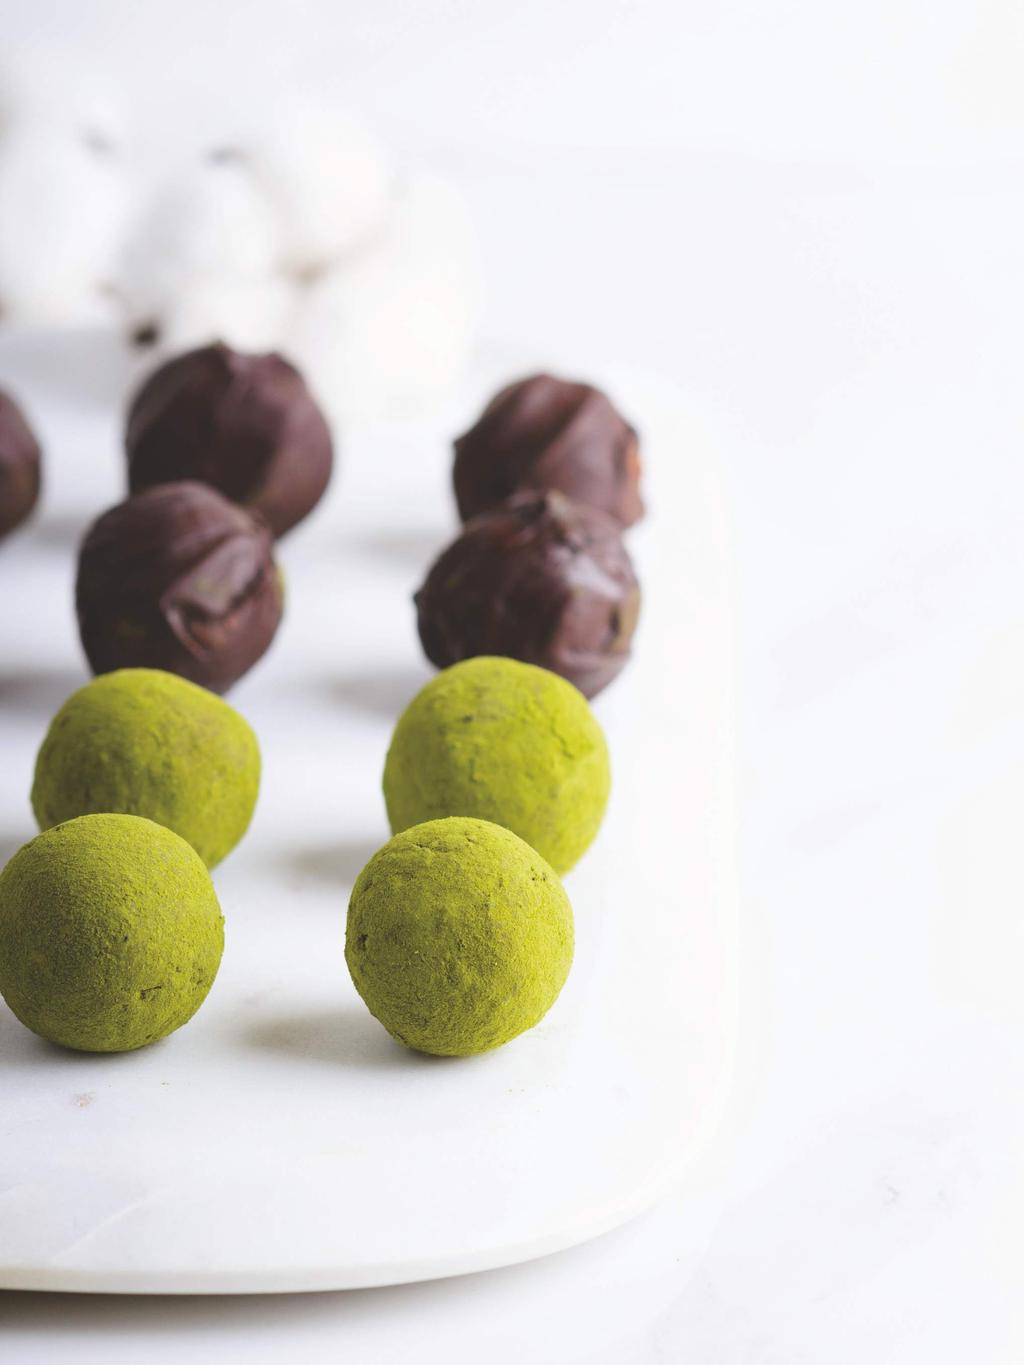 MATCHA LEMON TRUFFLES 10 MINS 3-4 HOURS 8 TRUFFLES - ½ cup of macadamia nuts (or choice of your own) - ¾ cup of shredded coconut - 1 tbsp coconut oil (melted) - 1 tbsp freshly squeezed lemon juice -